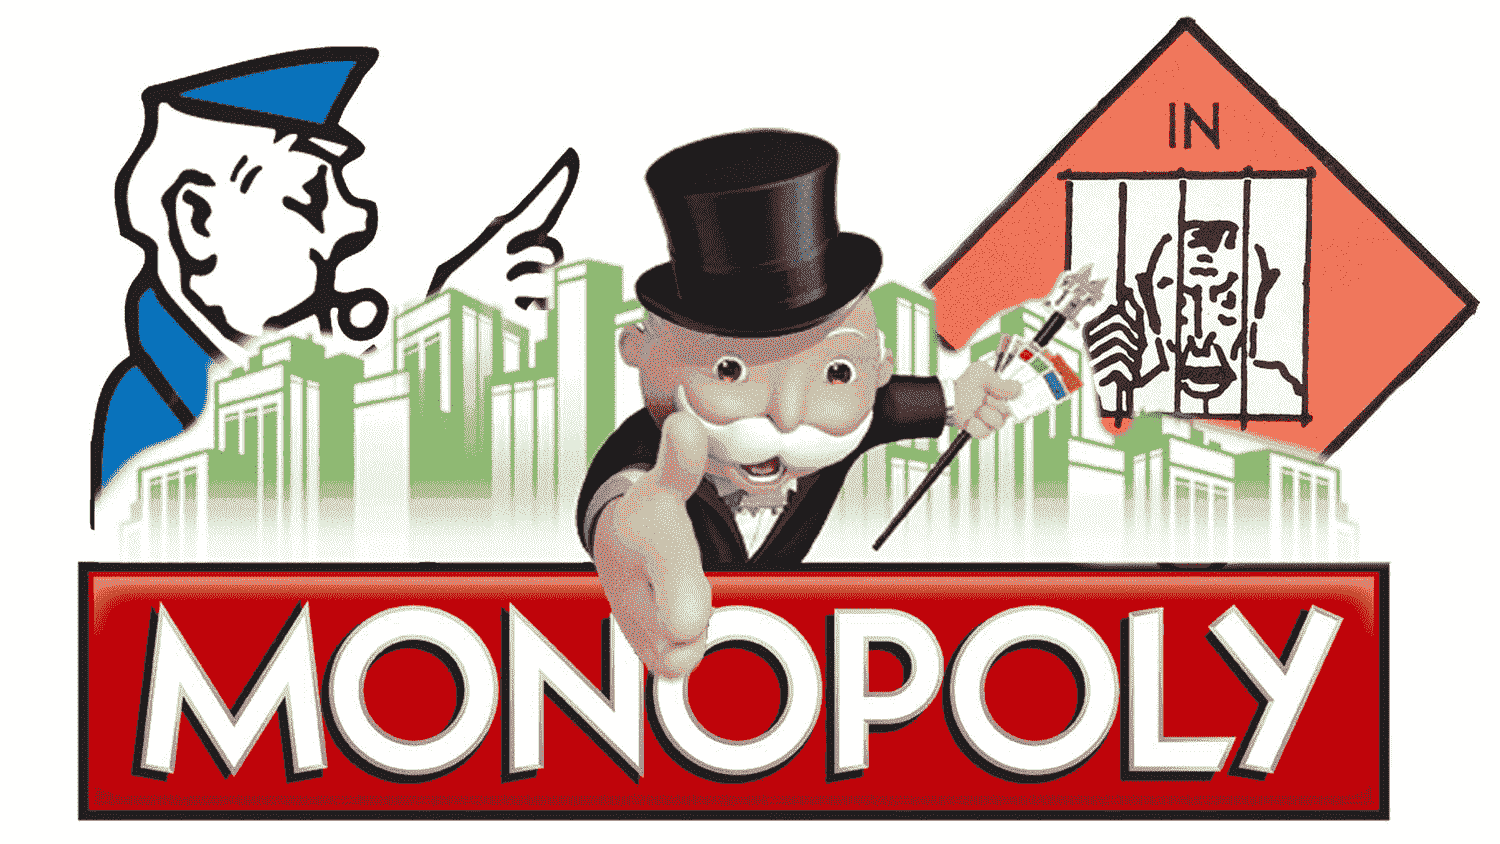 Monopoly Lifesized London: Good Things to Know #MonopolyLDN